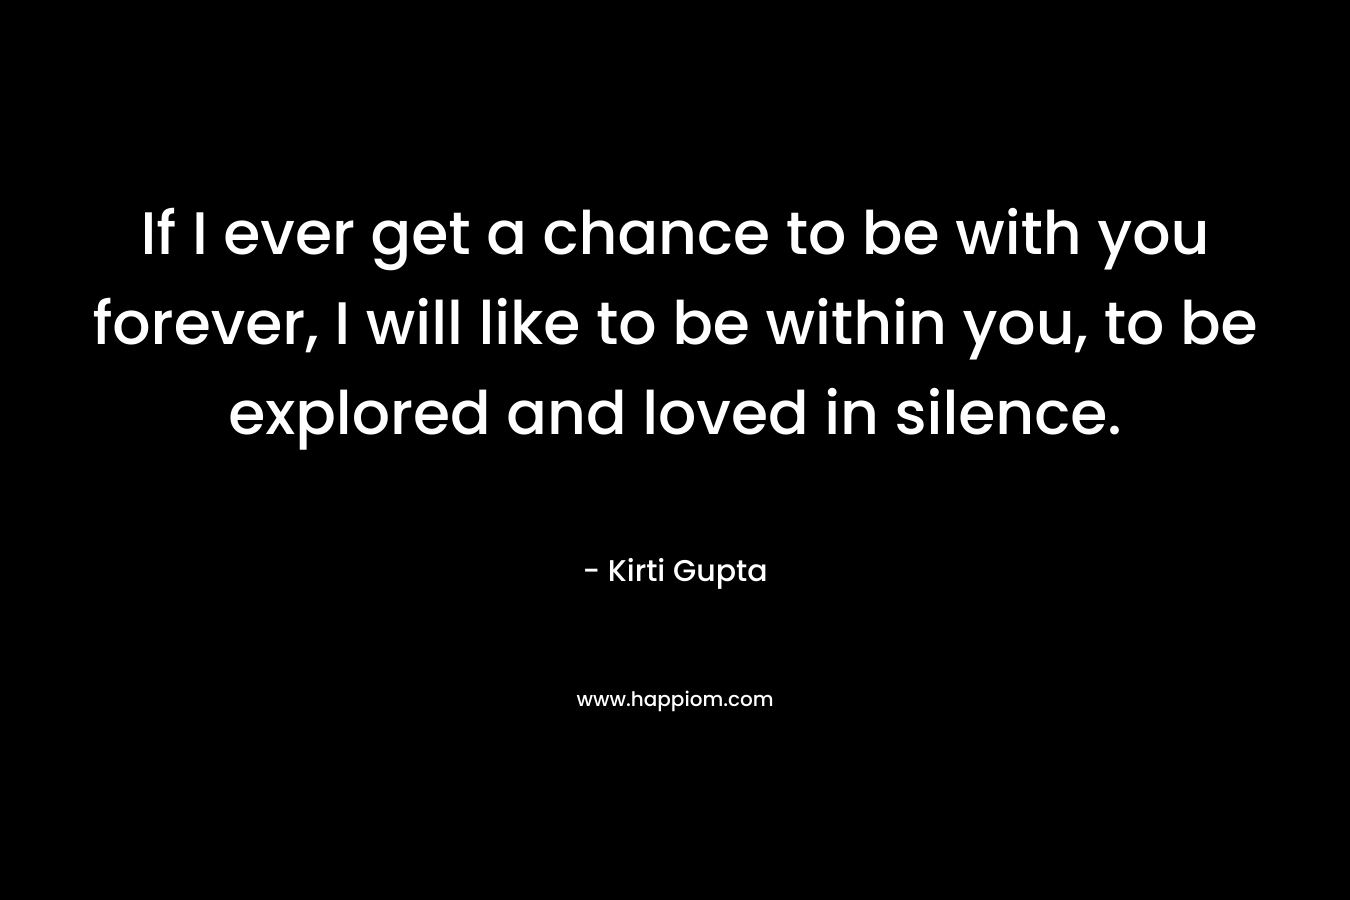 If I ever get a chance to be with you forever, I will like to be within you, to be explored and loved in silence. – Kirti Gupta